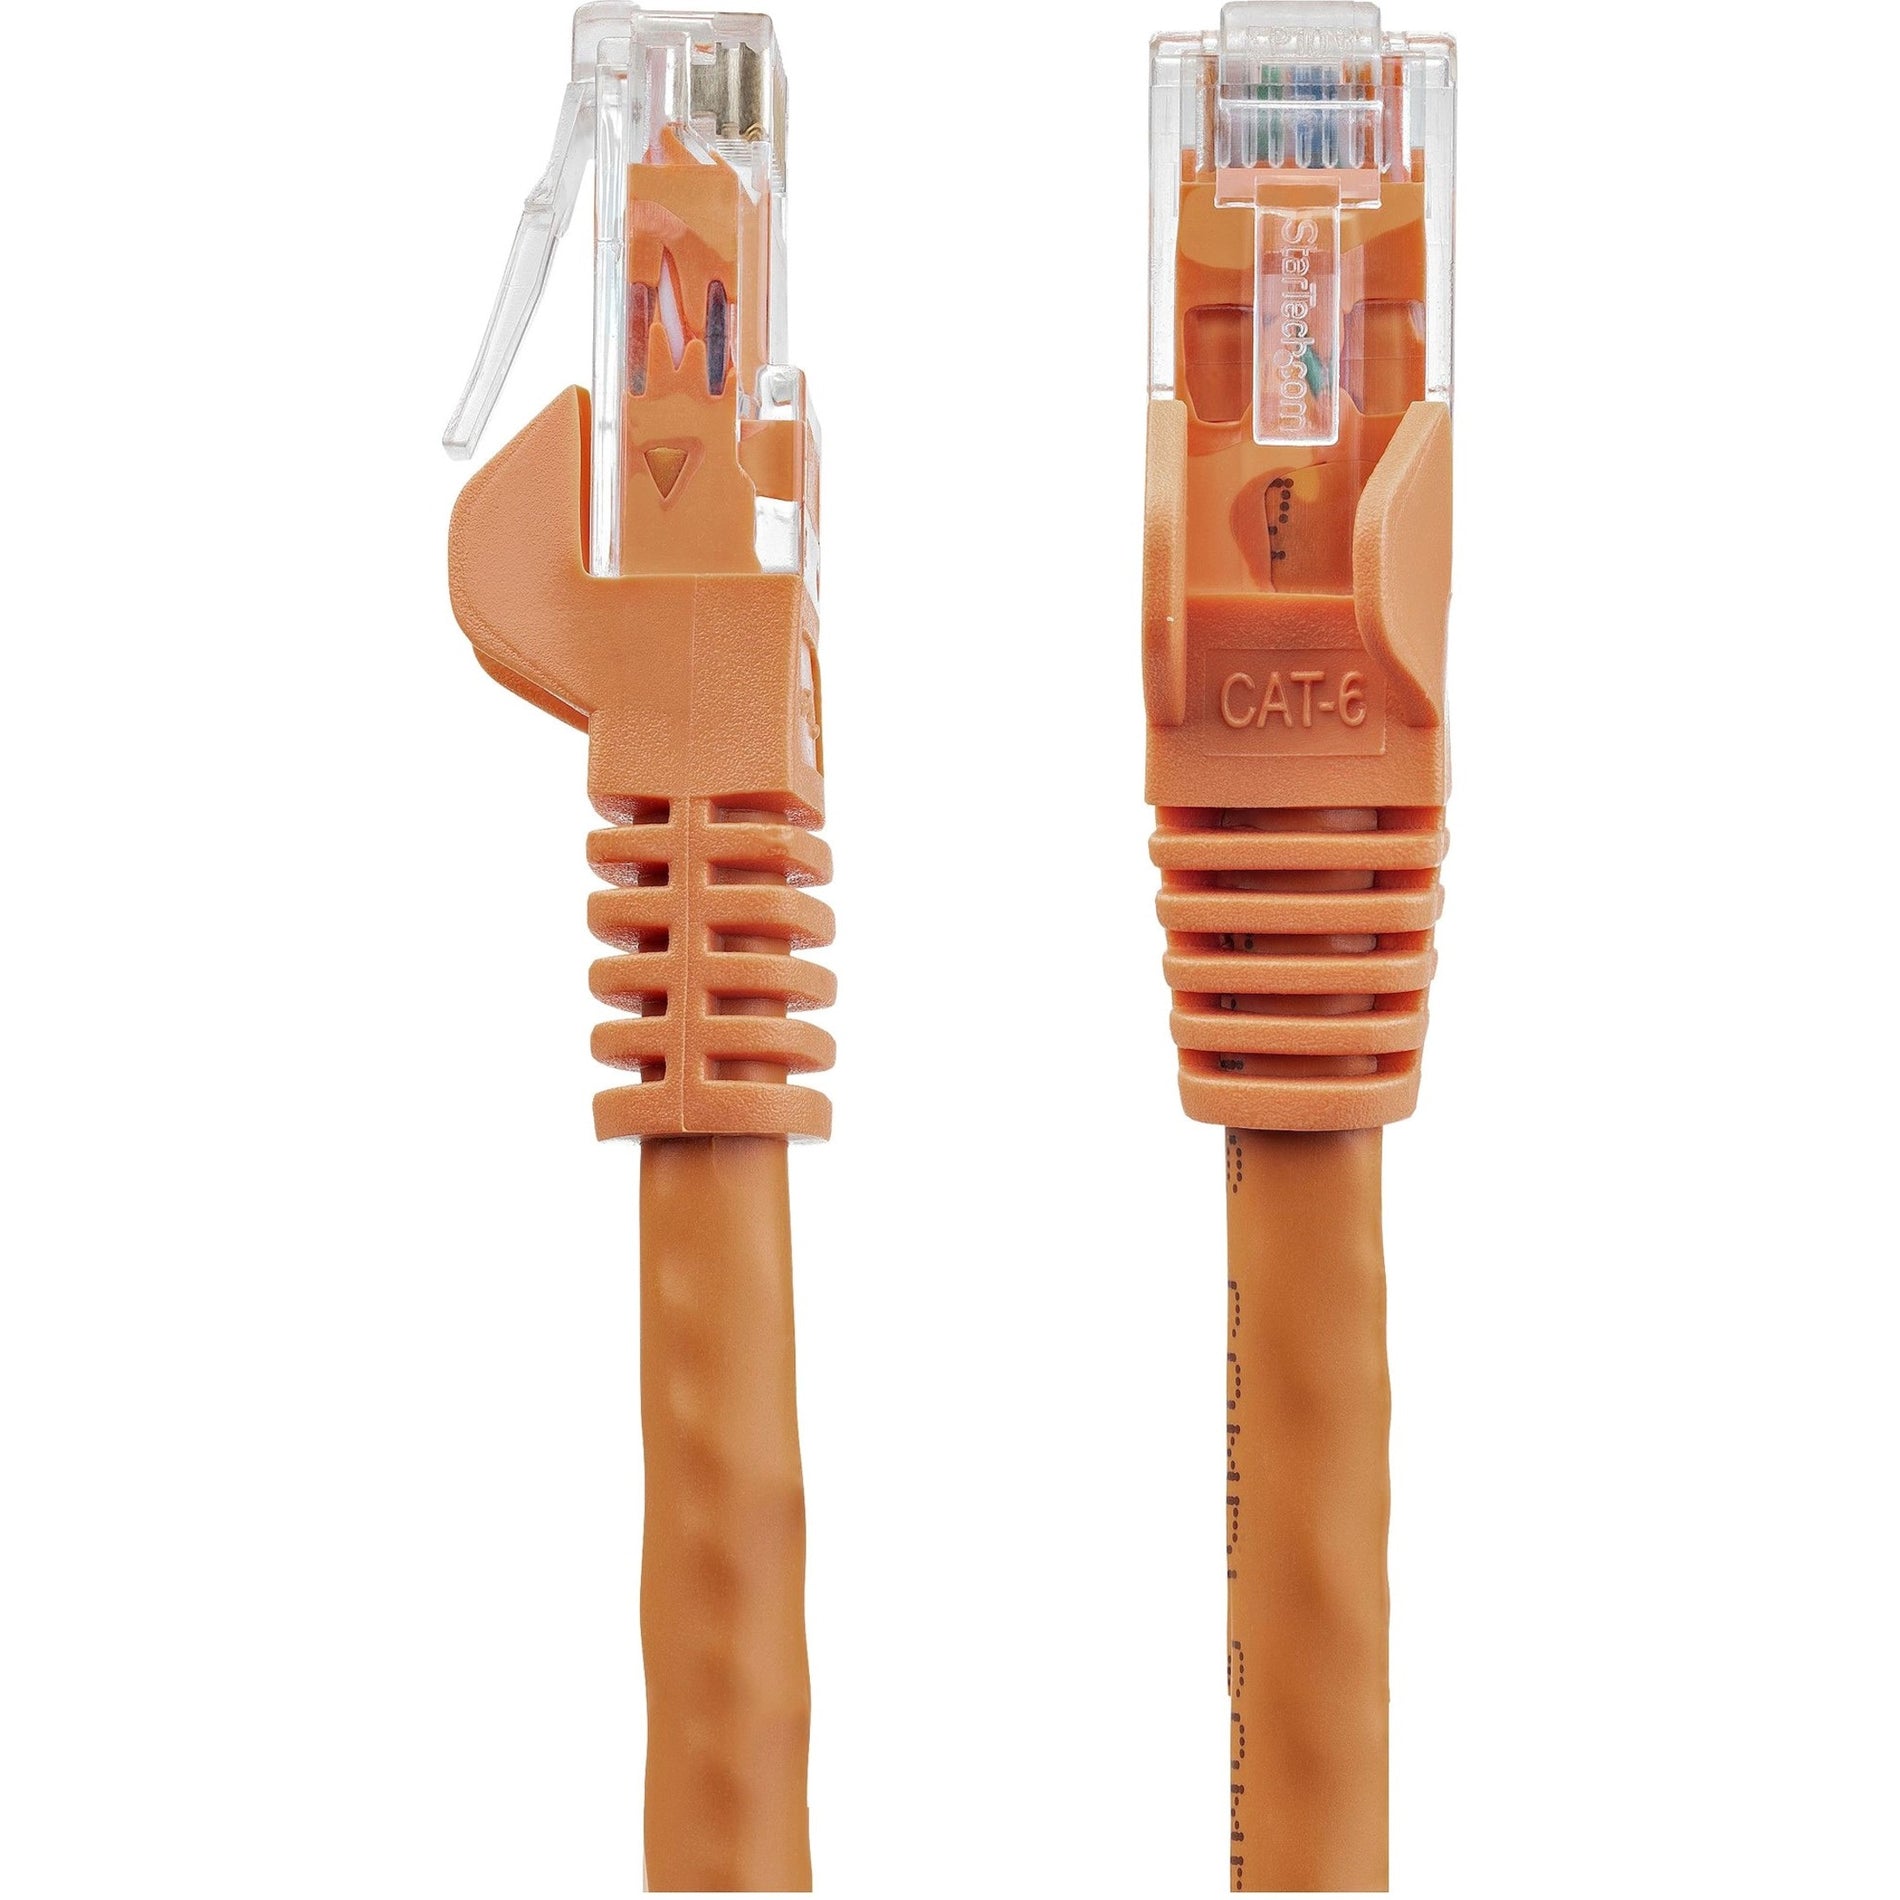 StarTech.com N6PATCH1OR Cat.6 Patch Network Cable, 1ft Orange, Short Ethernet Cable